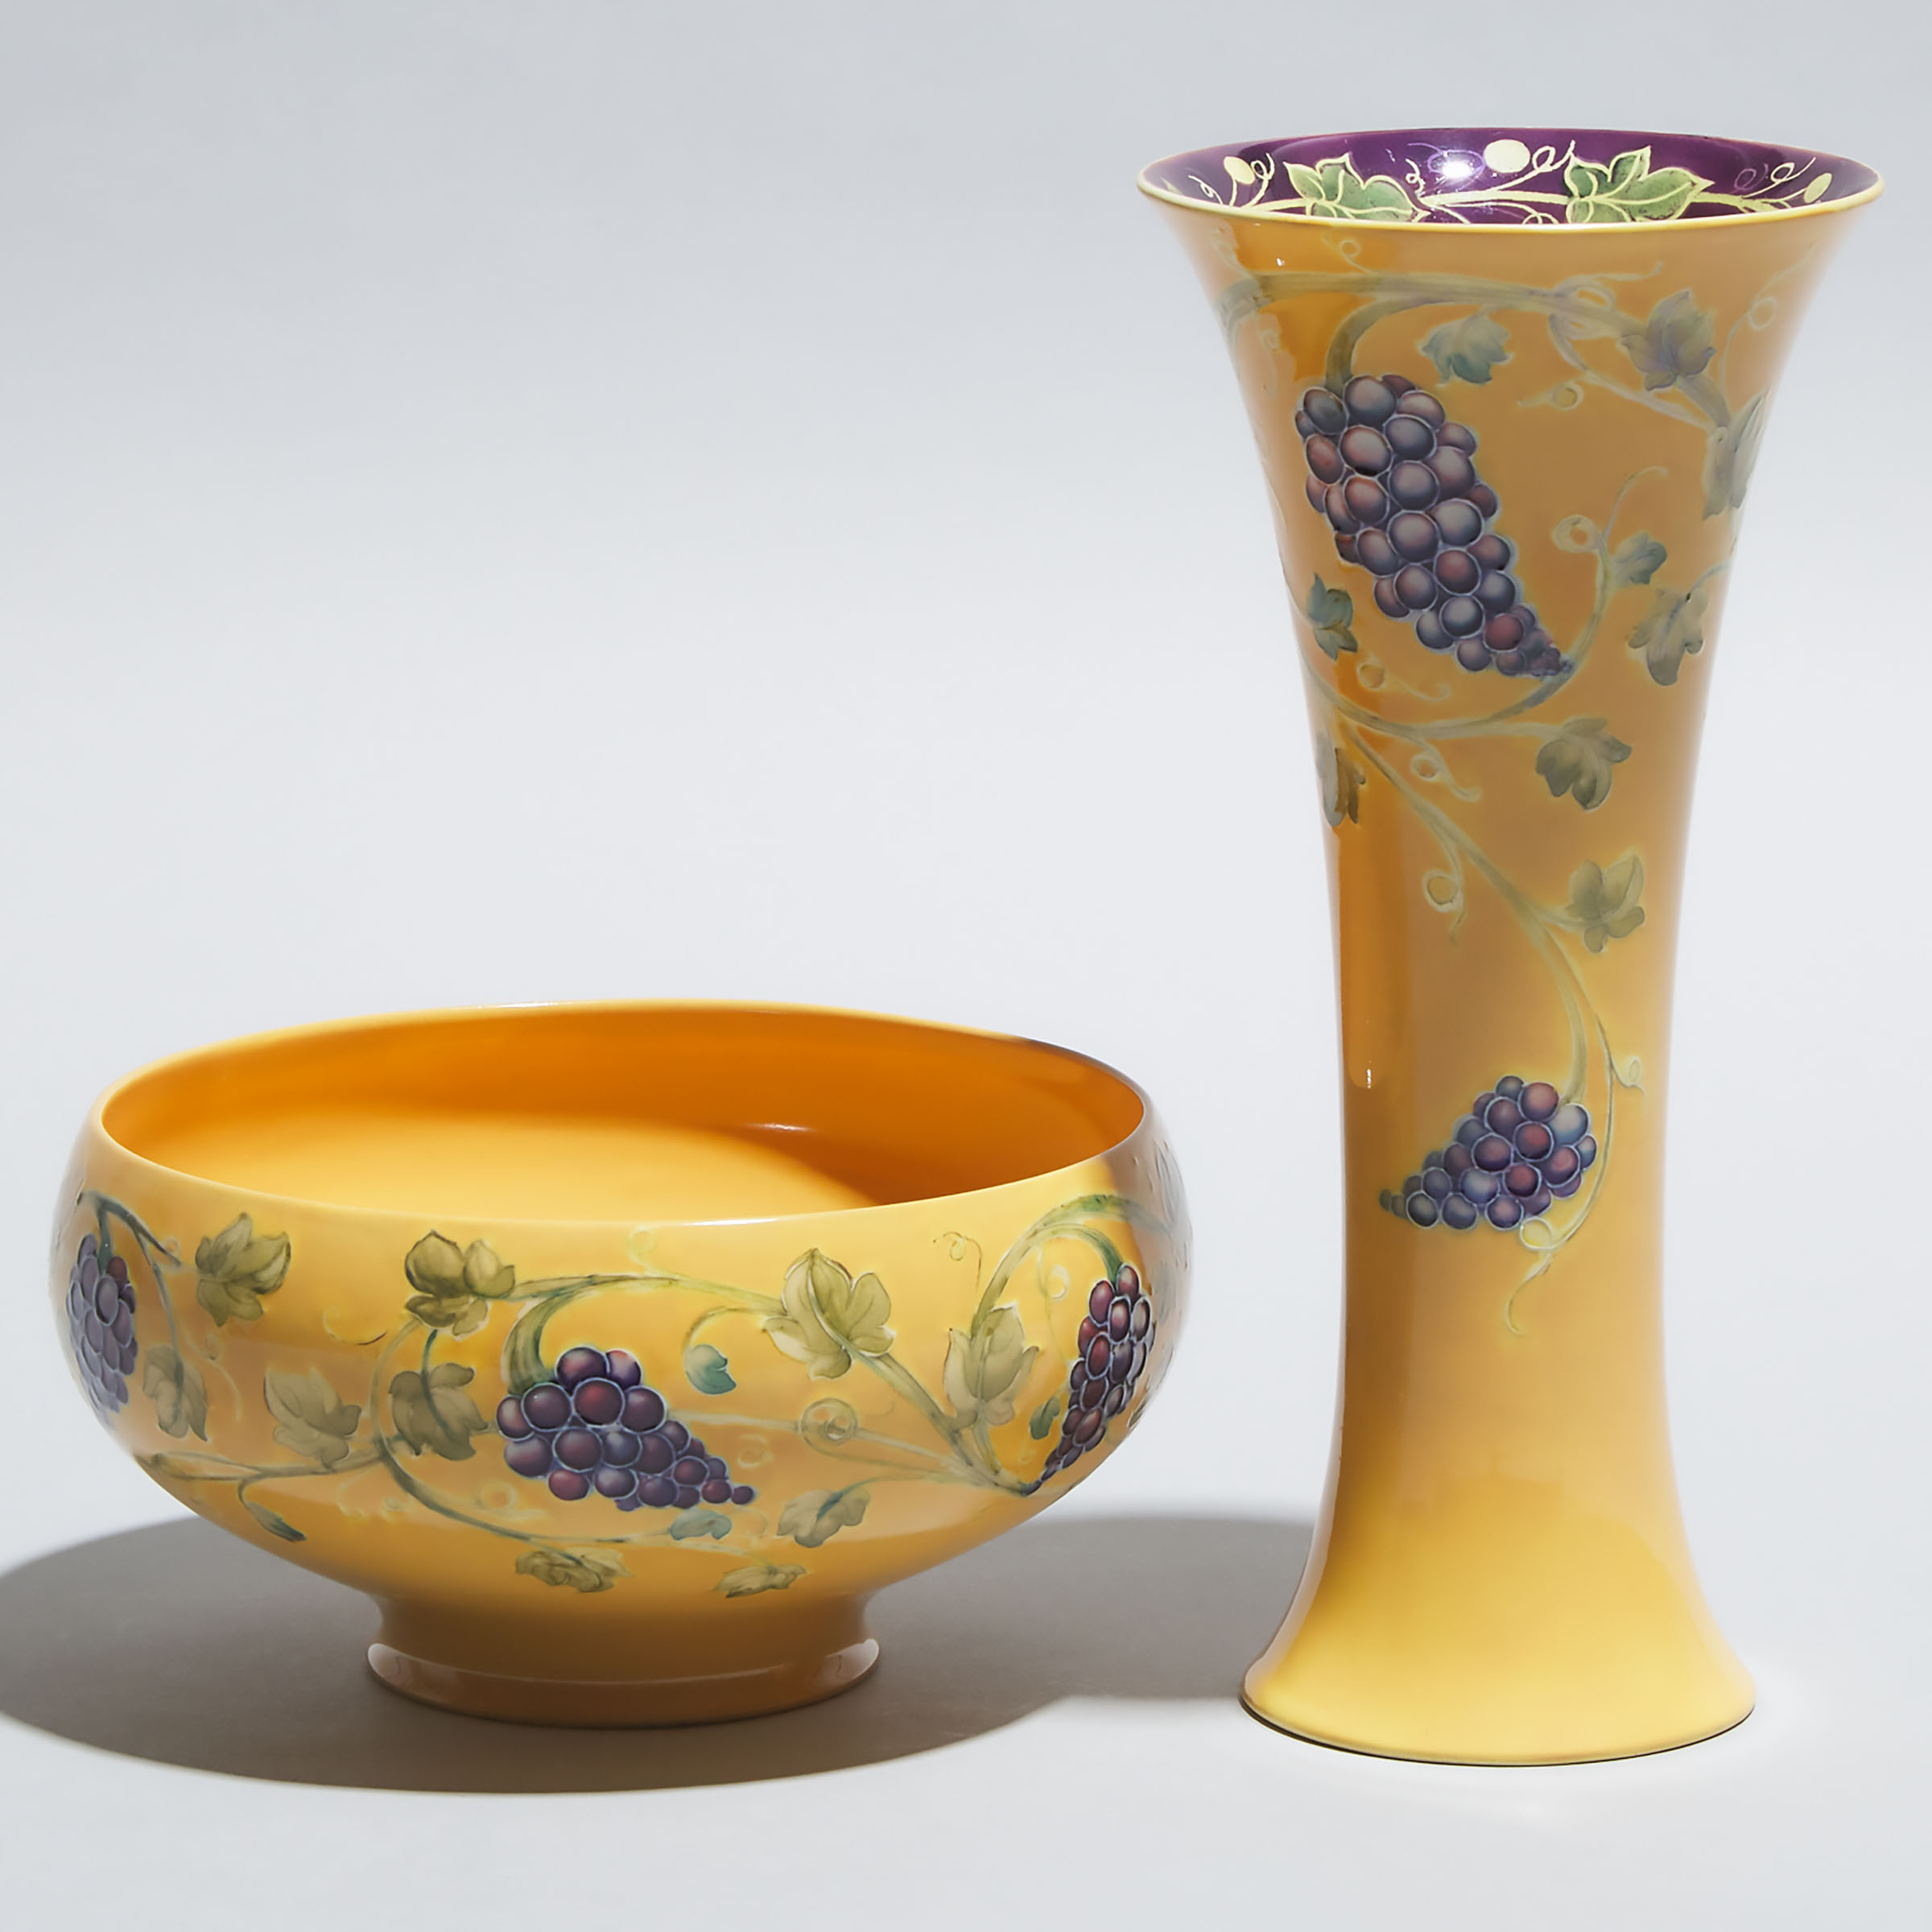 Macintyre Moorcroft Lustre Grapevine Vase and a Bowl, for Liberty & Co., c.1908